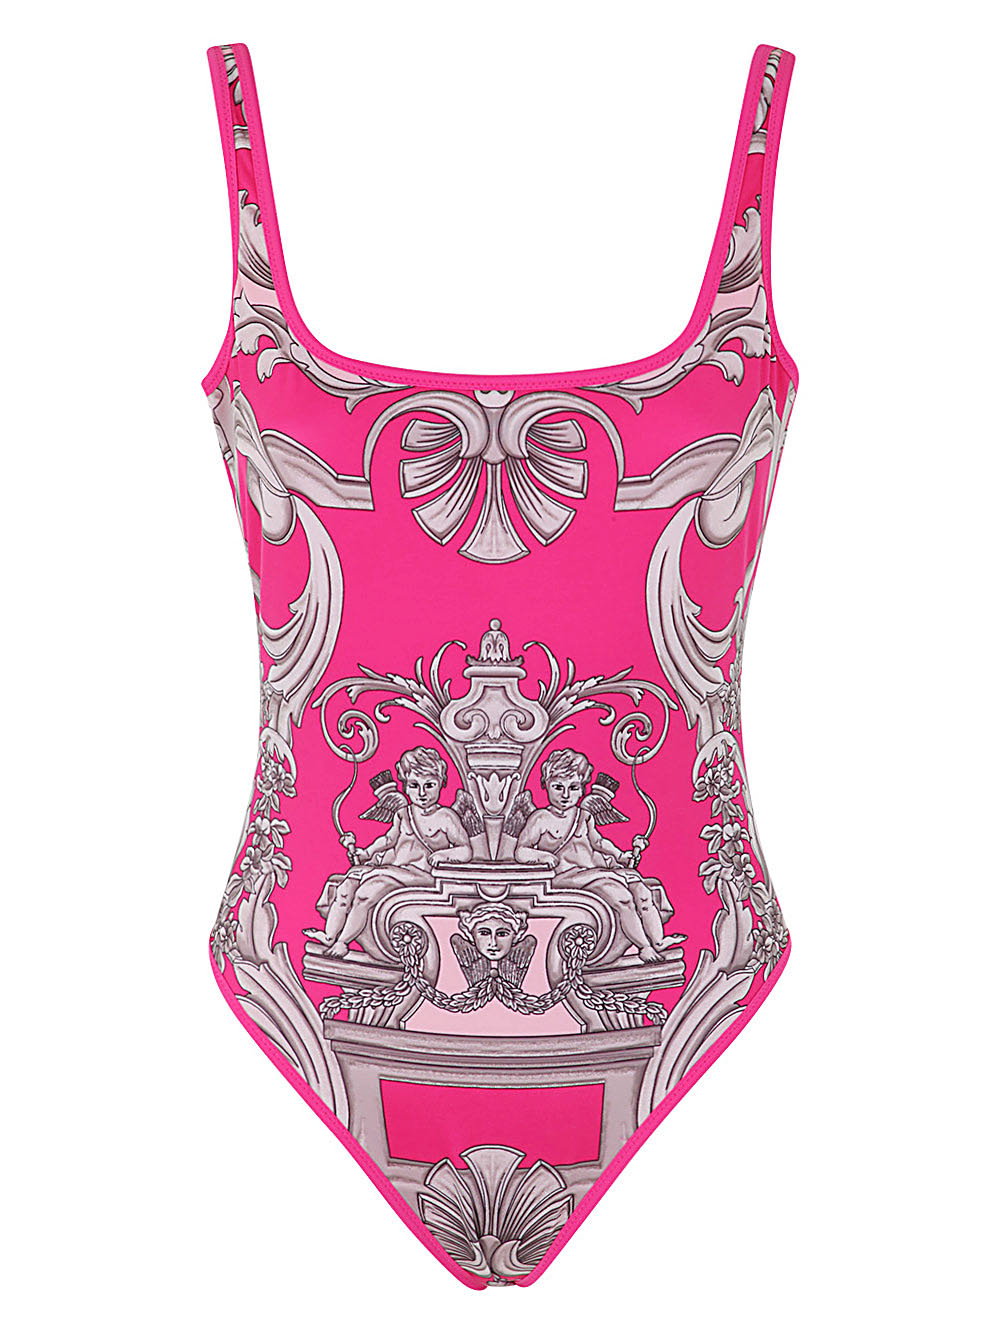 Versace Baroque Patterned One Piece Swimsuit